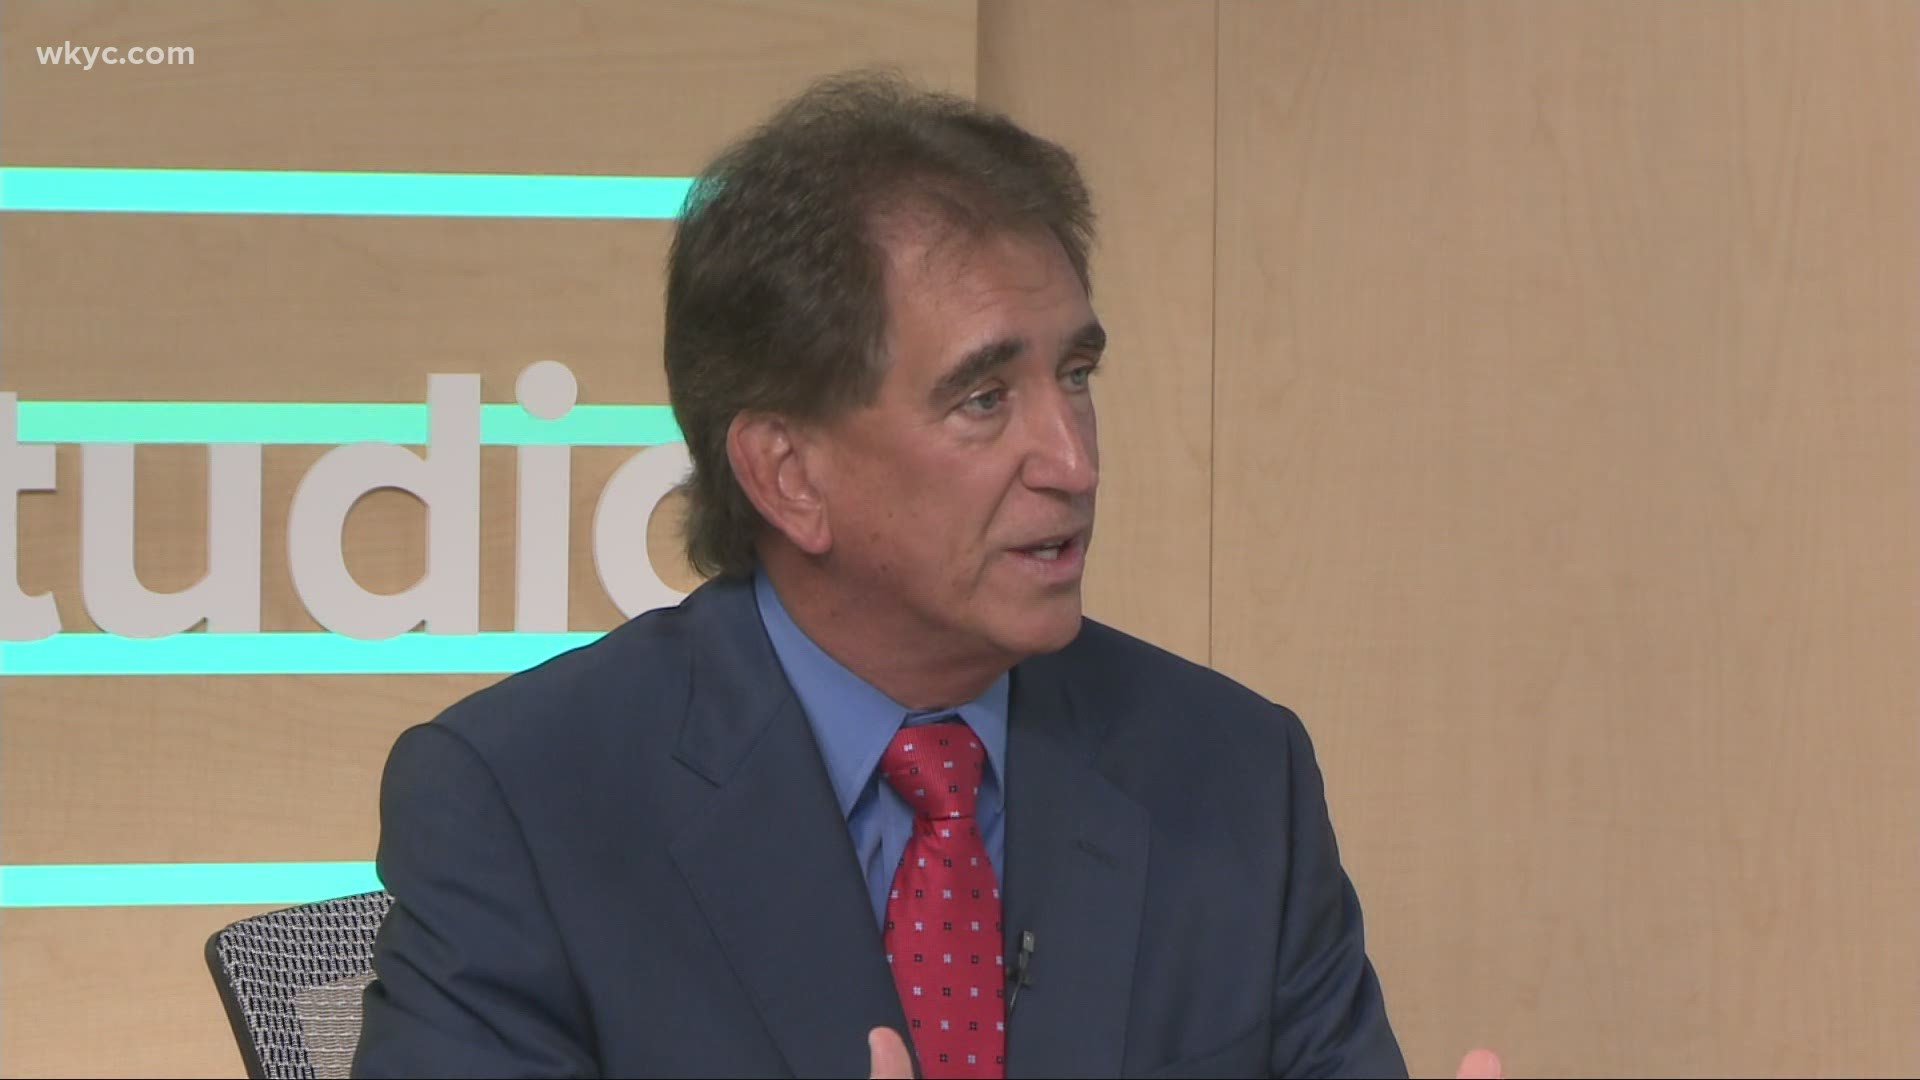 "We can't go another four years and continue to lose ground," Renacci told Russ Mitchell in their one-on-one interview.